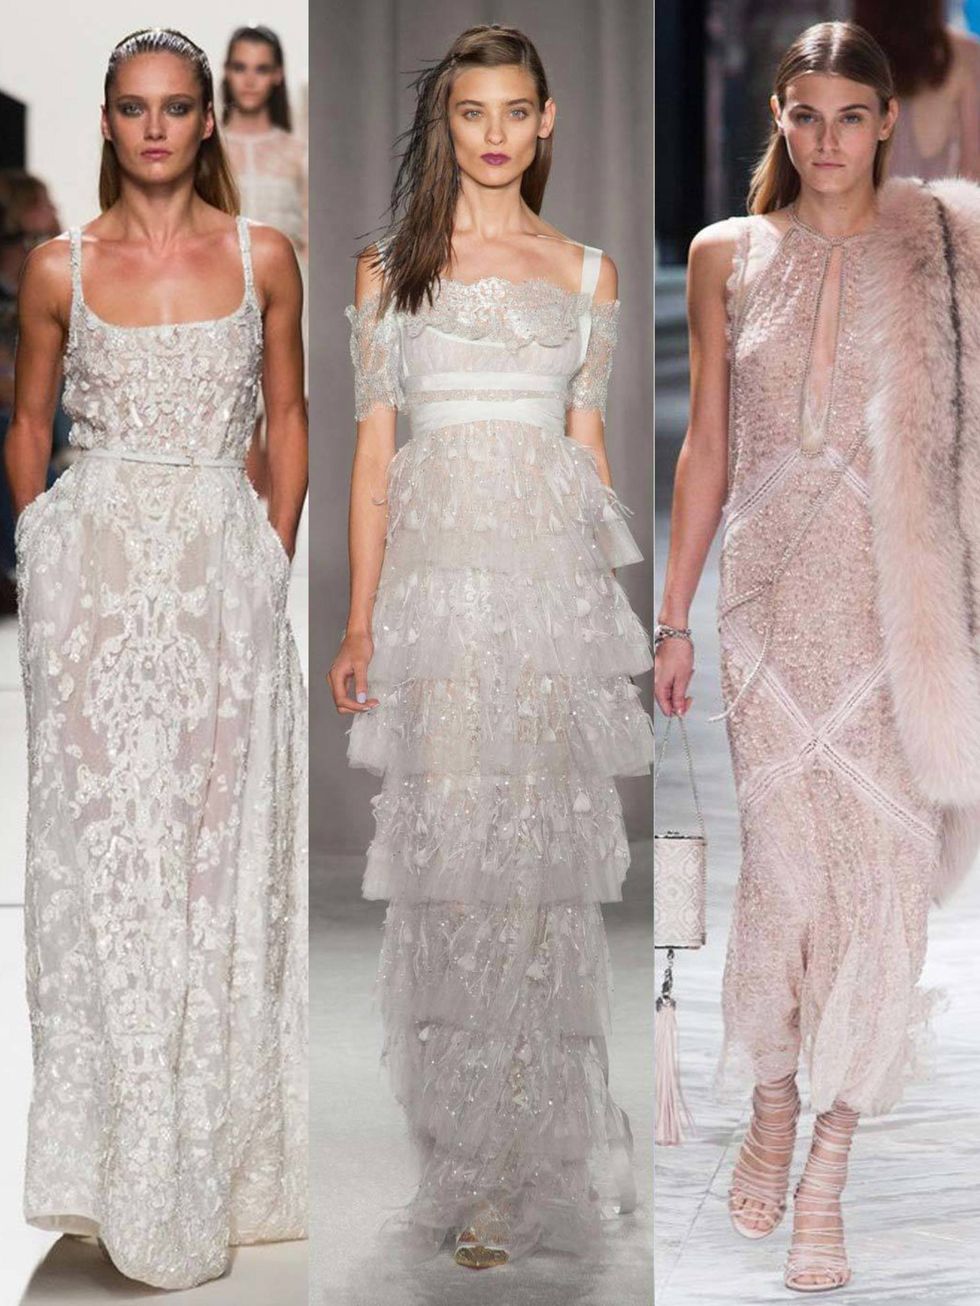 <p>Bias cut gowns of sensuous silk; frothy, feminine confections of light-as-air chiffon. For the <a href="http://www.elleuk.com/style/occasions/elle-weddings">fashion bride</a>, the spring/summer 2014 <a href="http://www.elleuk.com/catwalk">catwalks</a> 